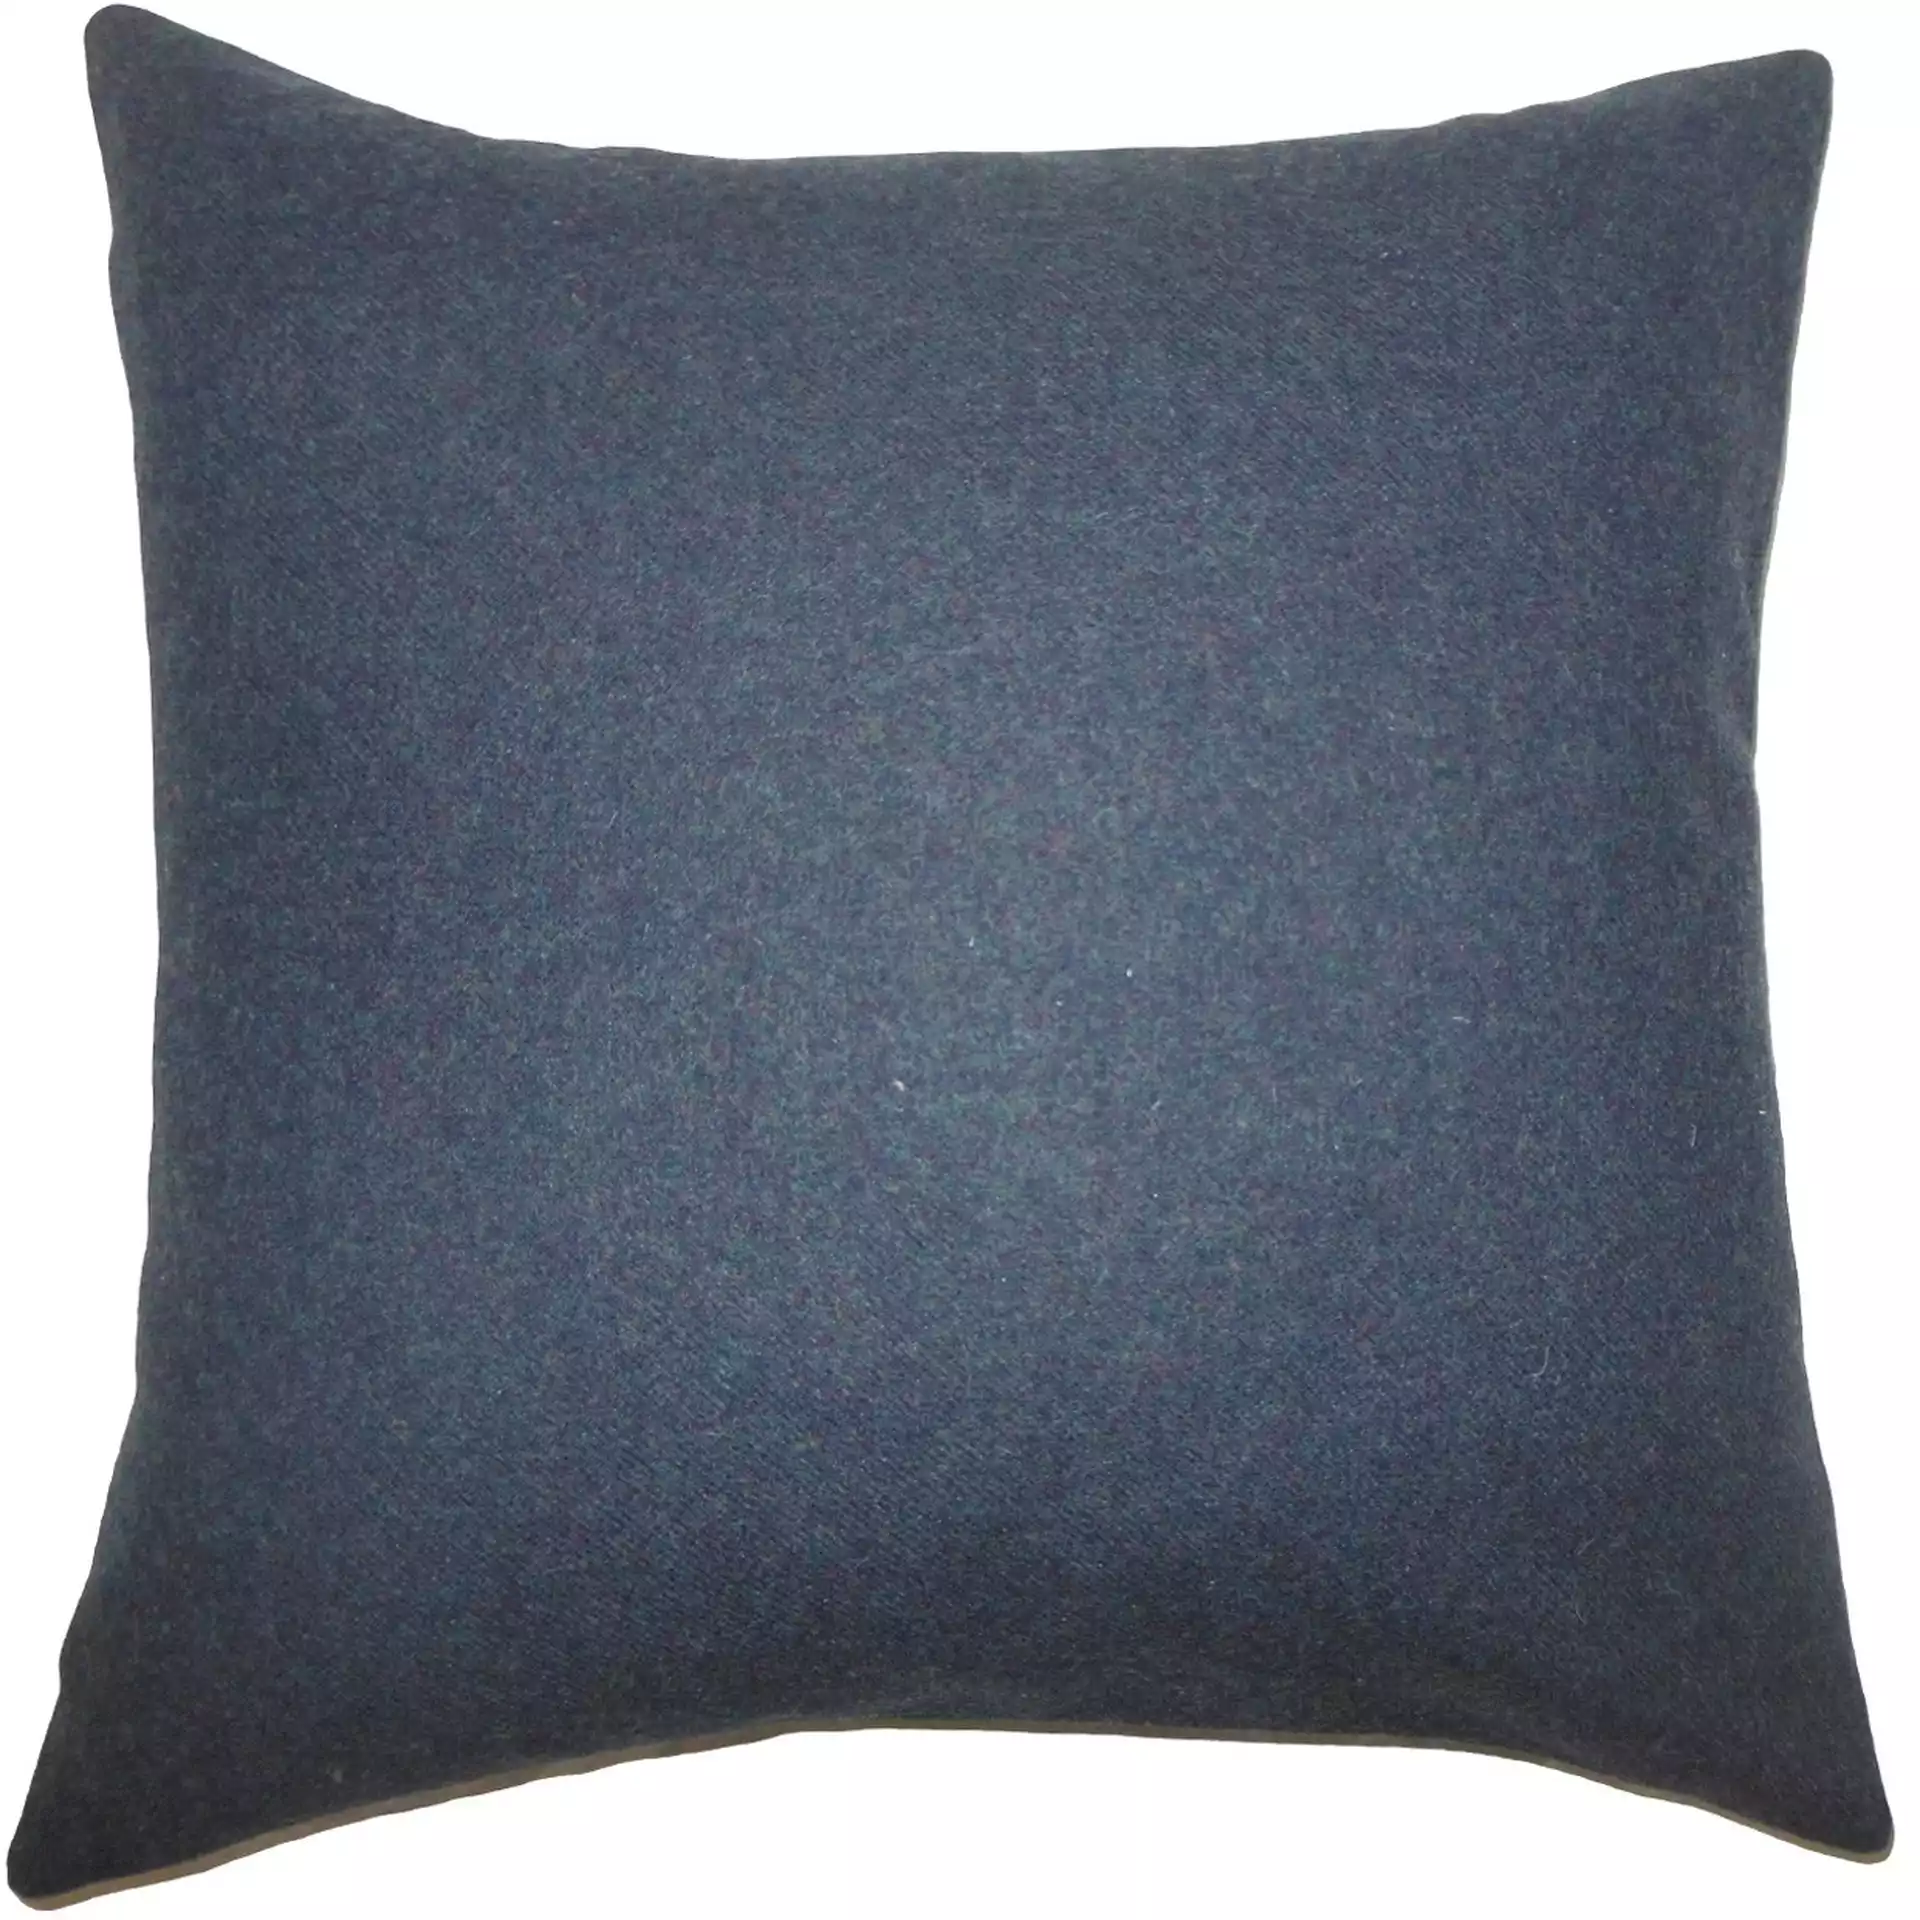 Oisin Solid Pillow Blue - 20x20 - Poly Insert